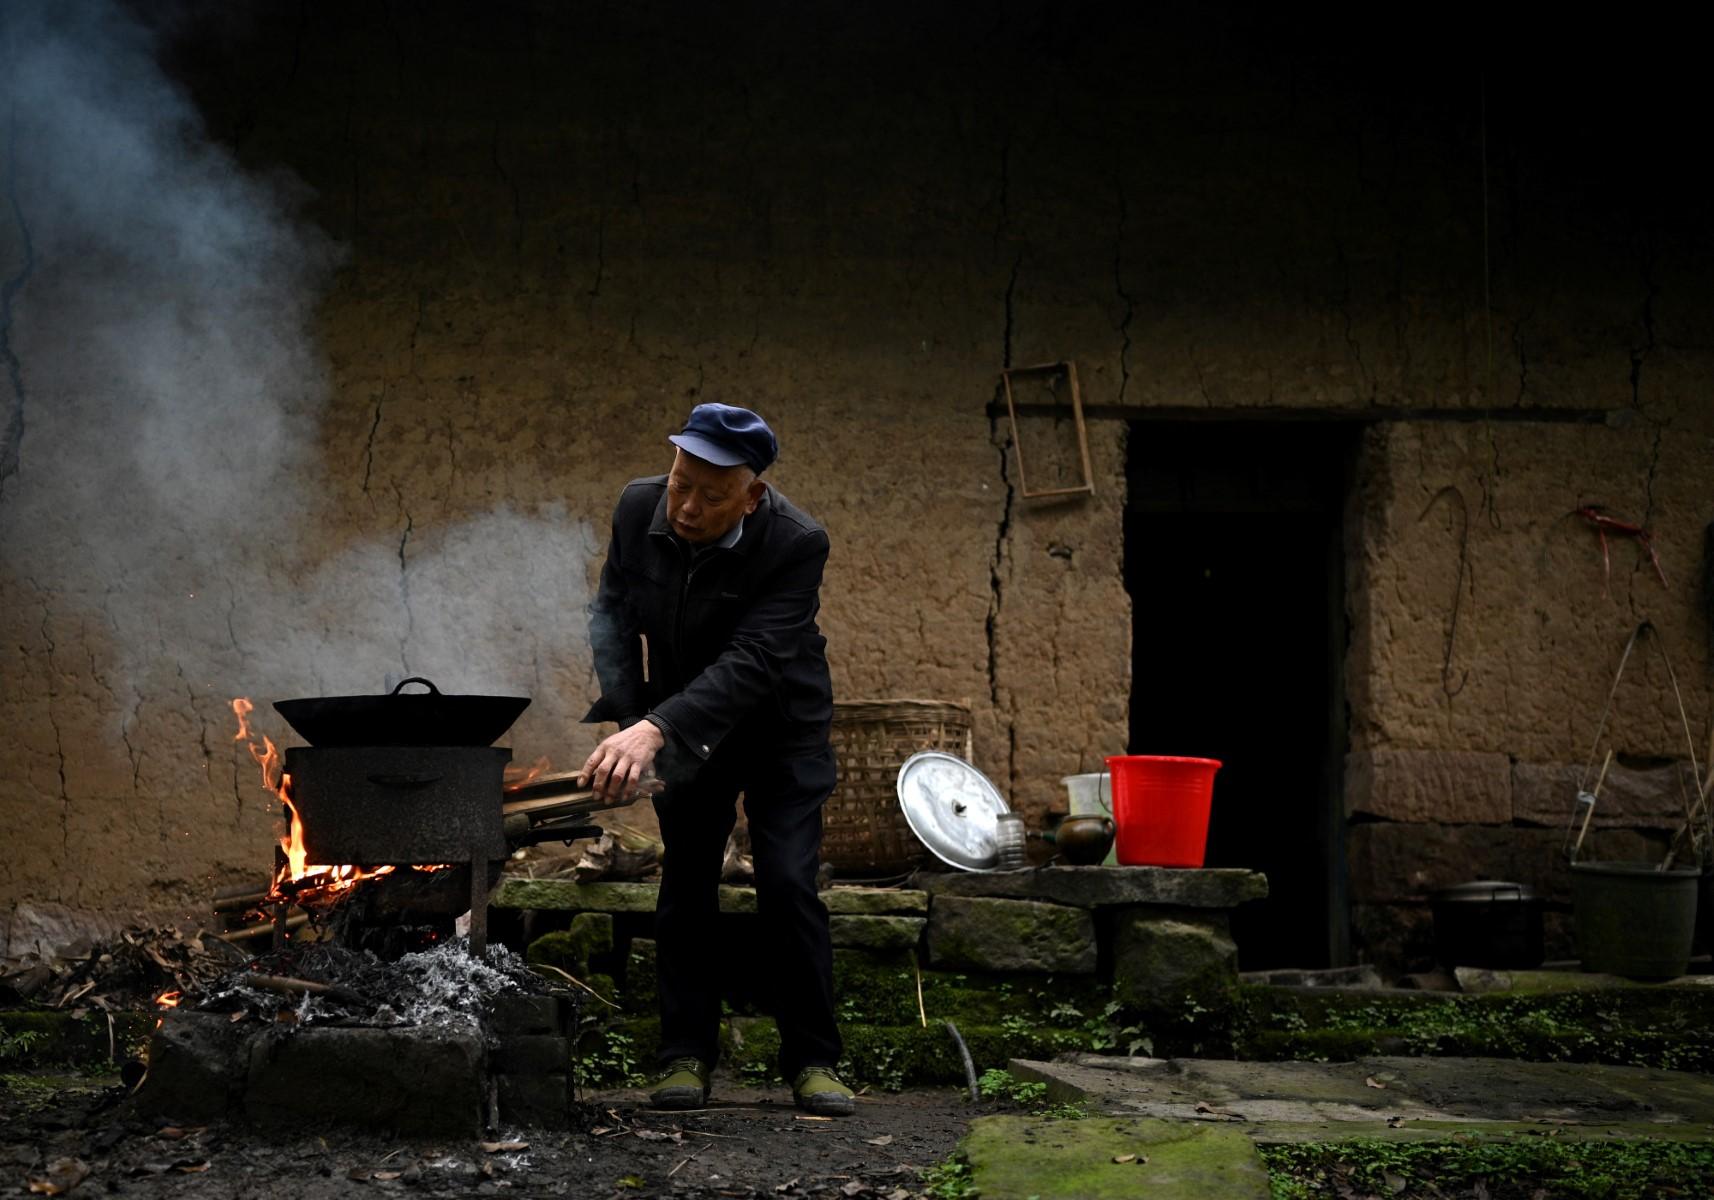 This photo taken on Nov 29, 2020, shows a man cooking a meal in front of his house in Zhongba, a small island near to the southwestern city of Chongqing. Photo: AFP